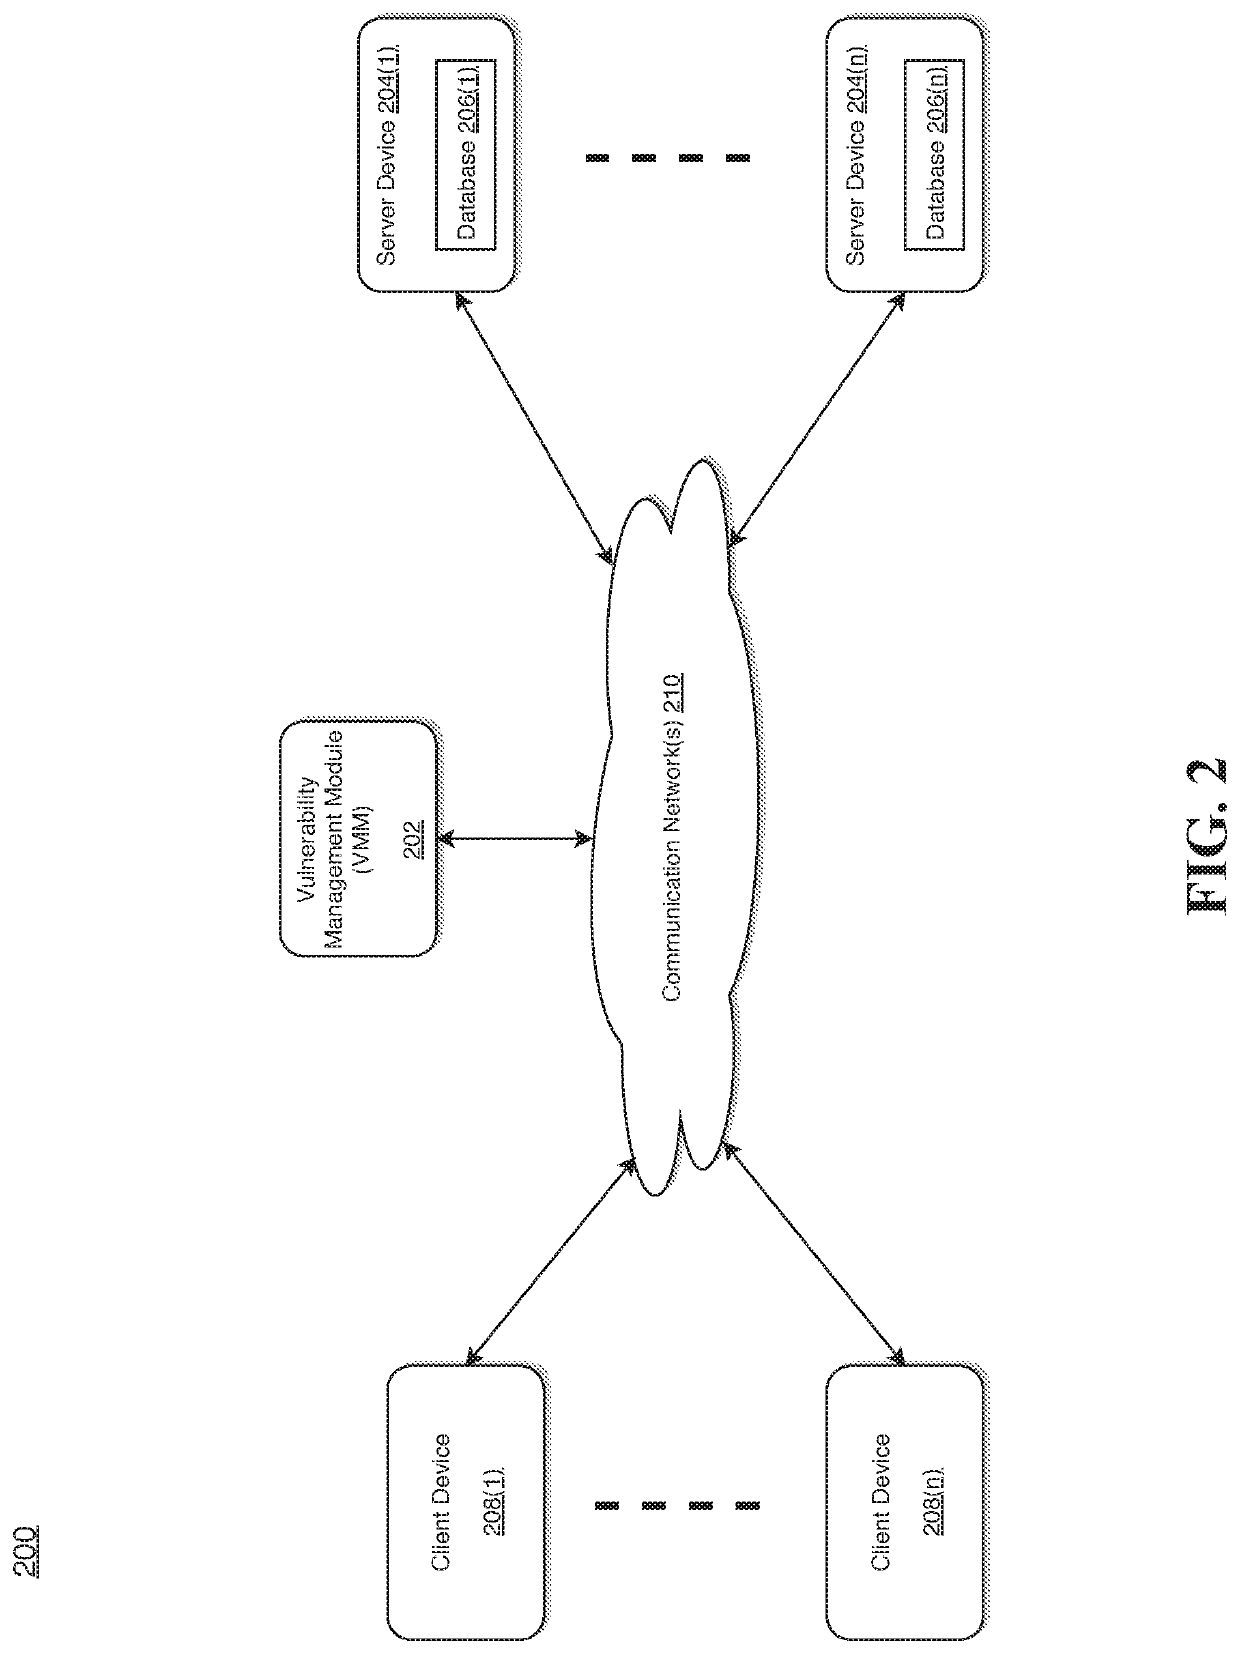 System and method for implementing a vulnerability management module